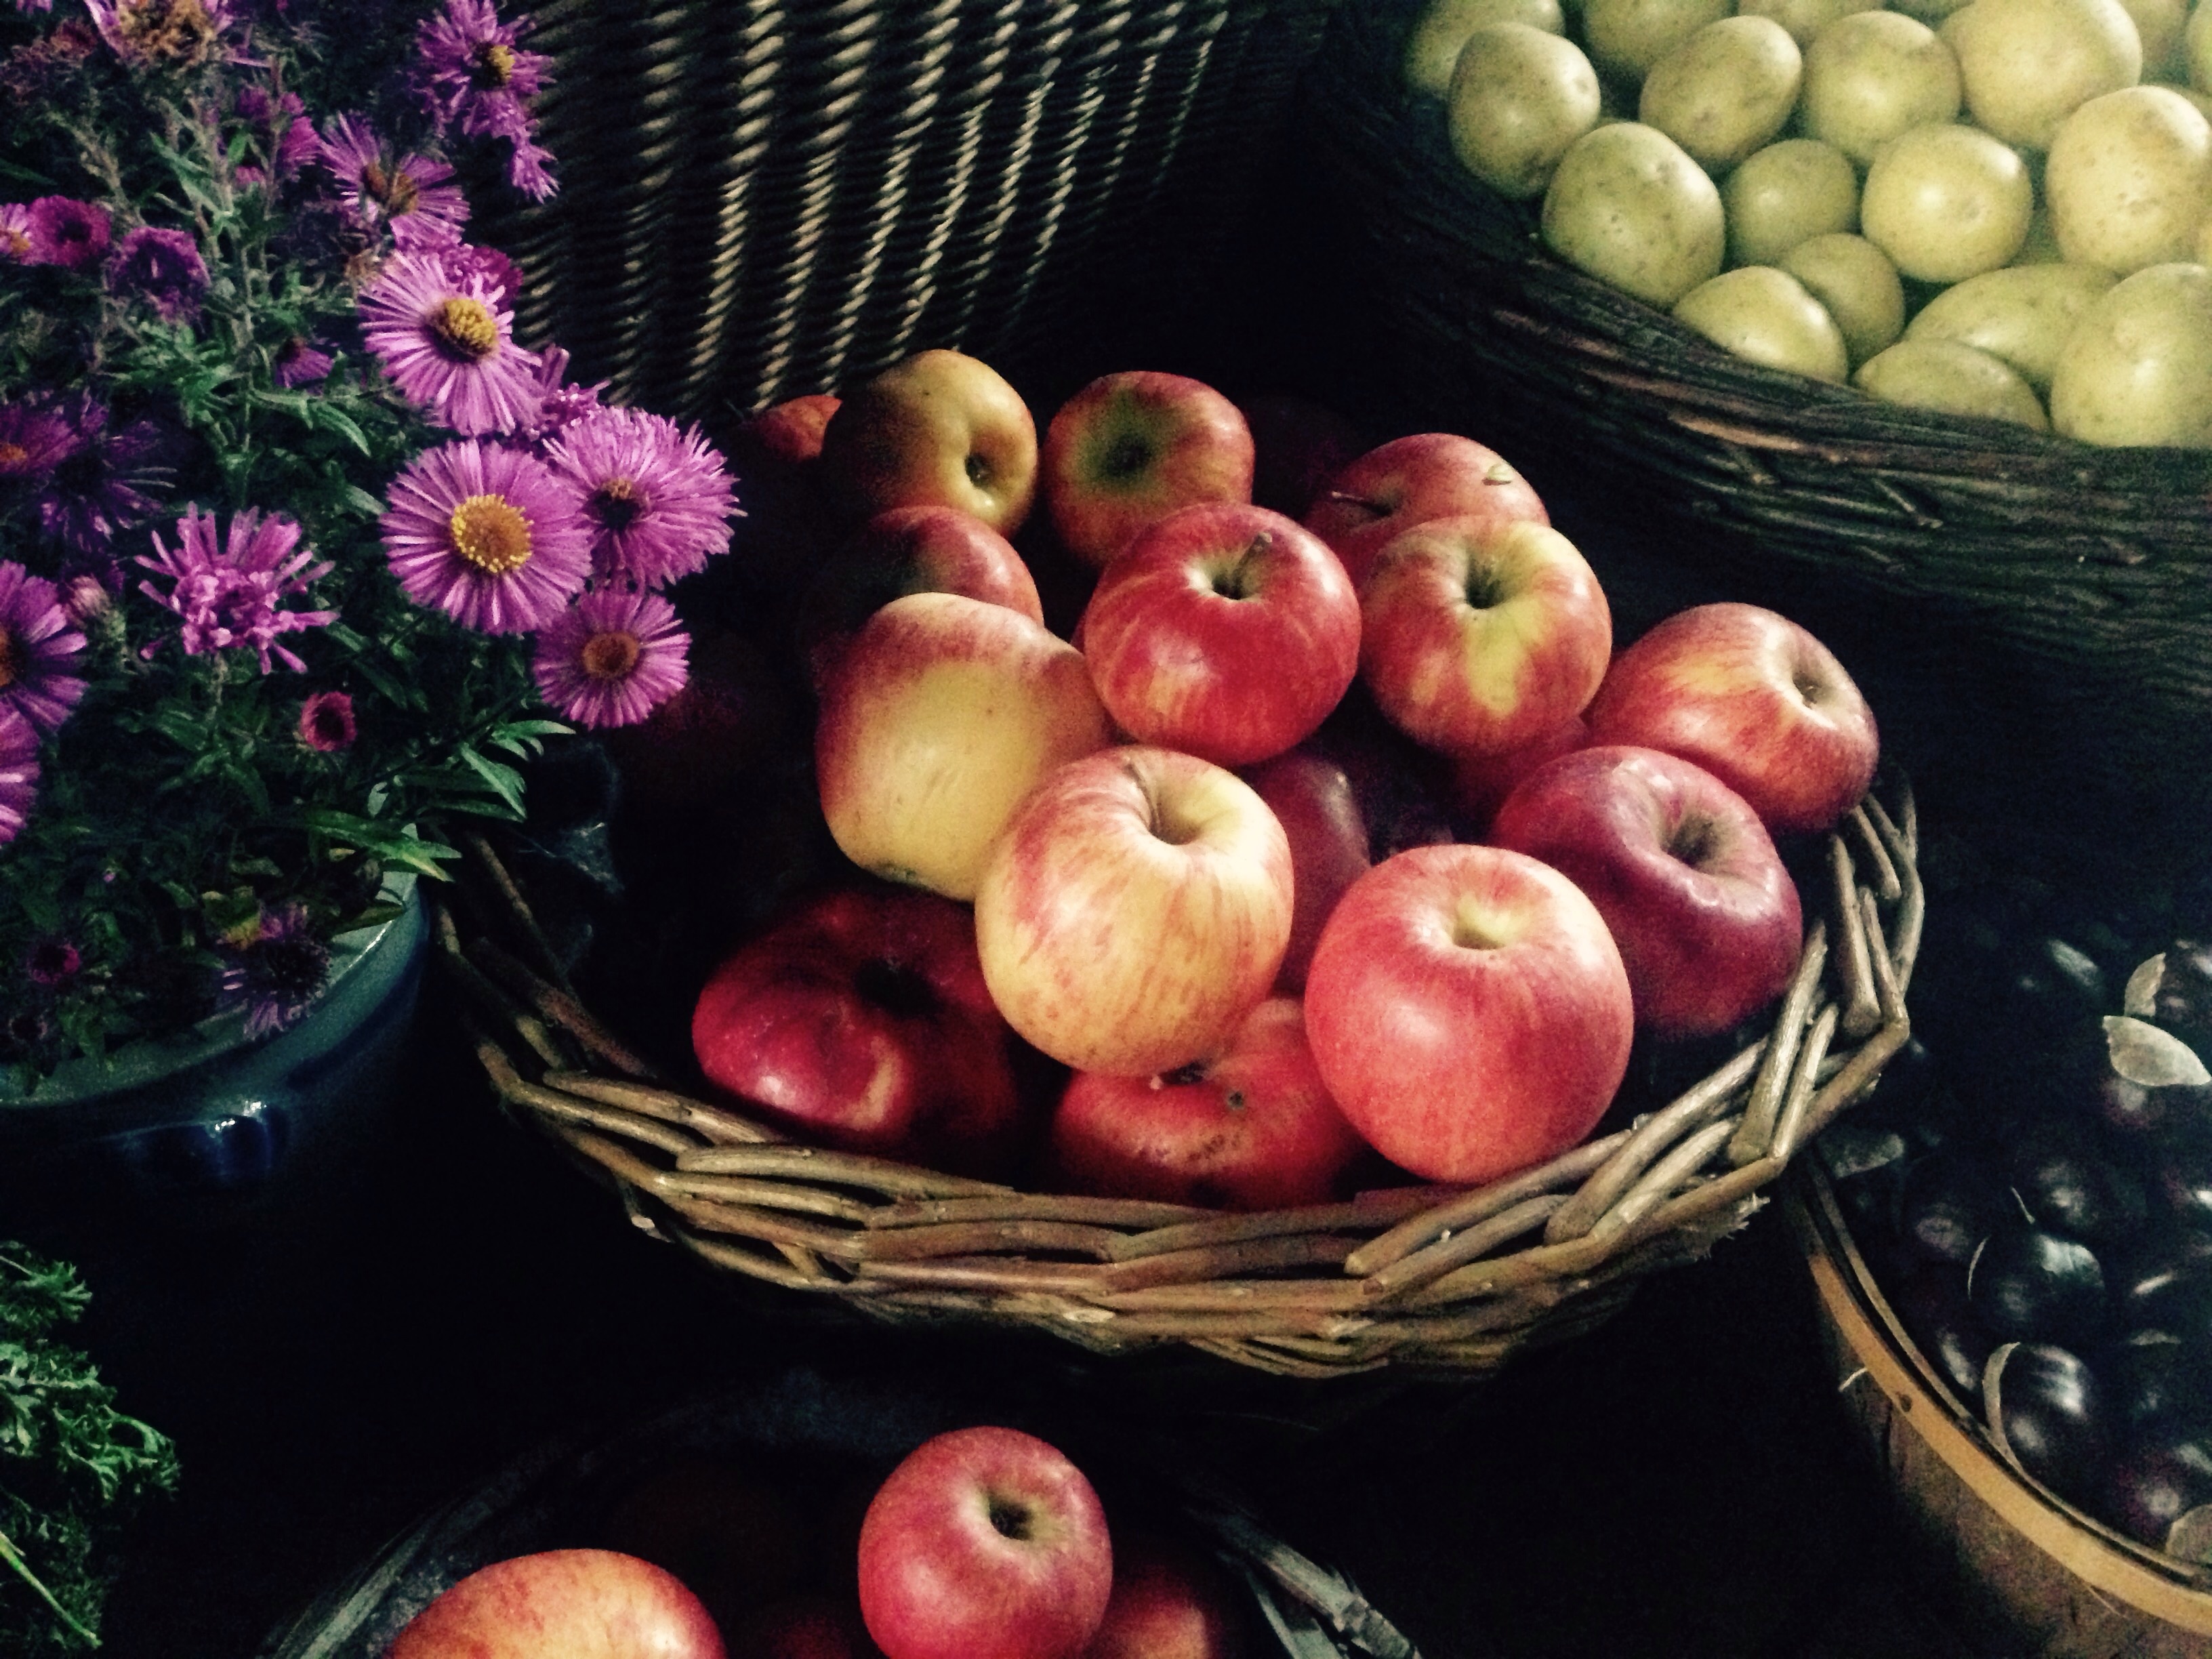 Autumn harvest in baskets free image download